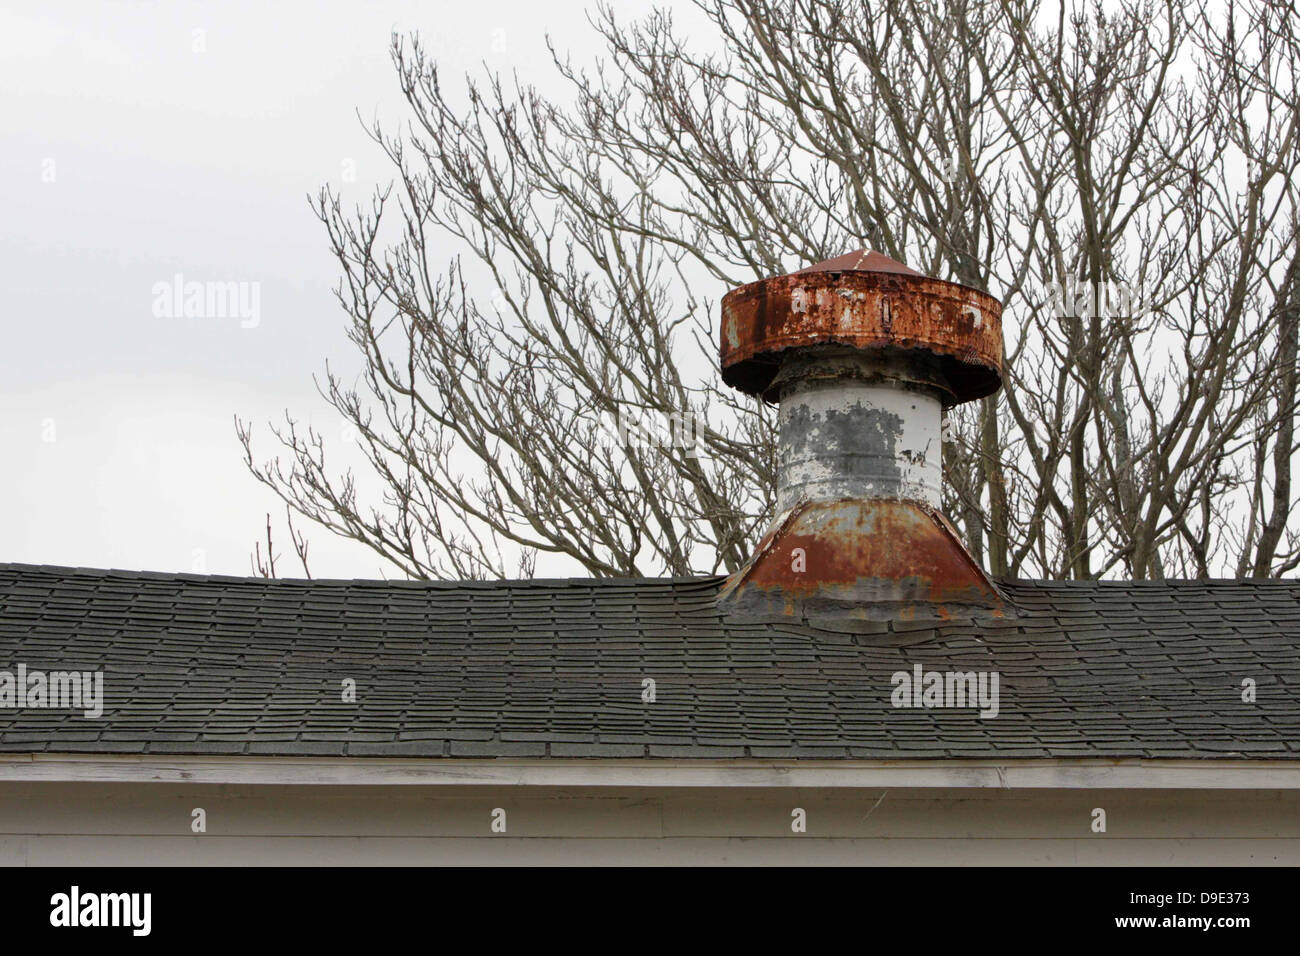 RUSTY OLD CHIMNEY ROOF SHINGLES TREE BRANCHES Stock Photo